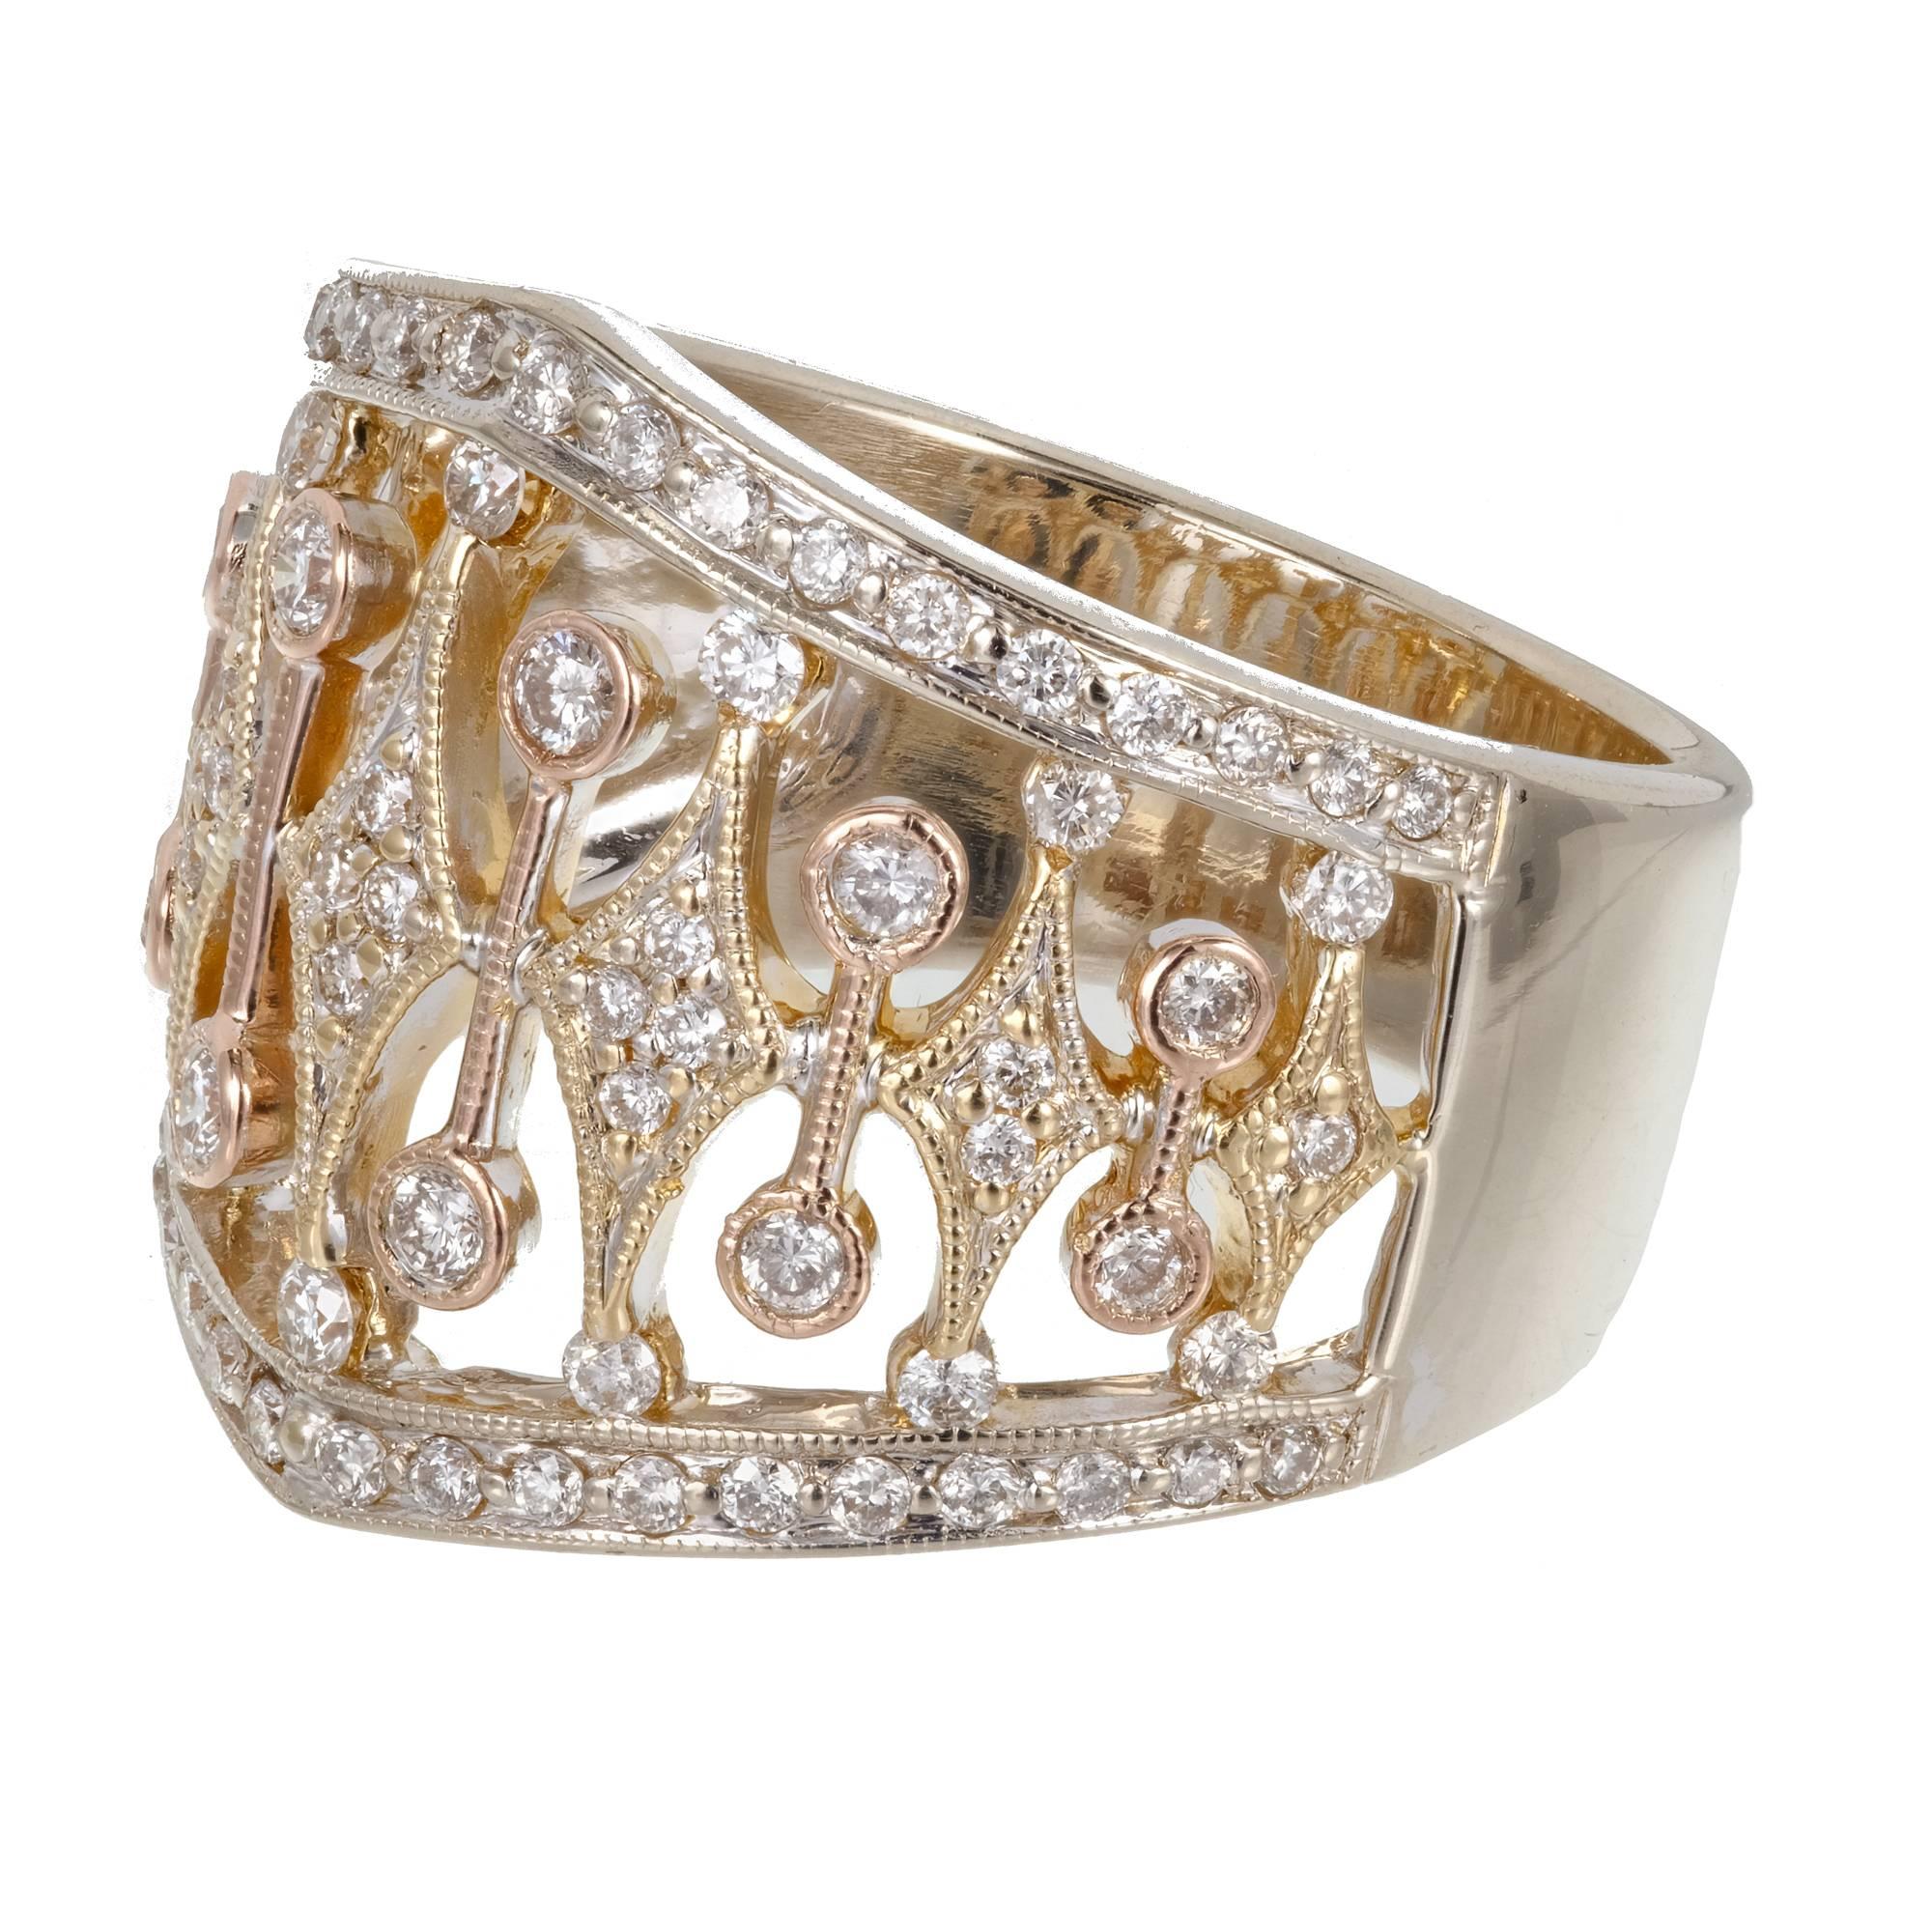 Parviz .70 Carat Diamond Tri Color Gold Wide Band Ring In Good Condition For Sale In Stamford, CT